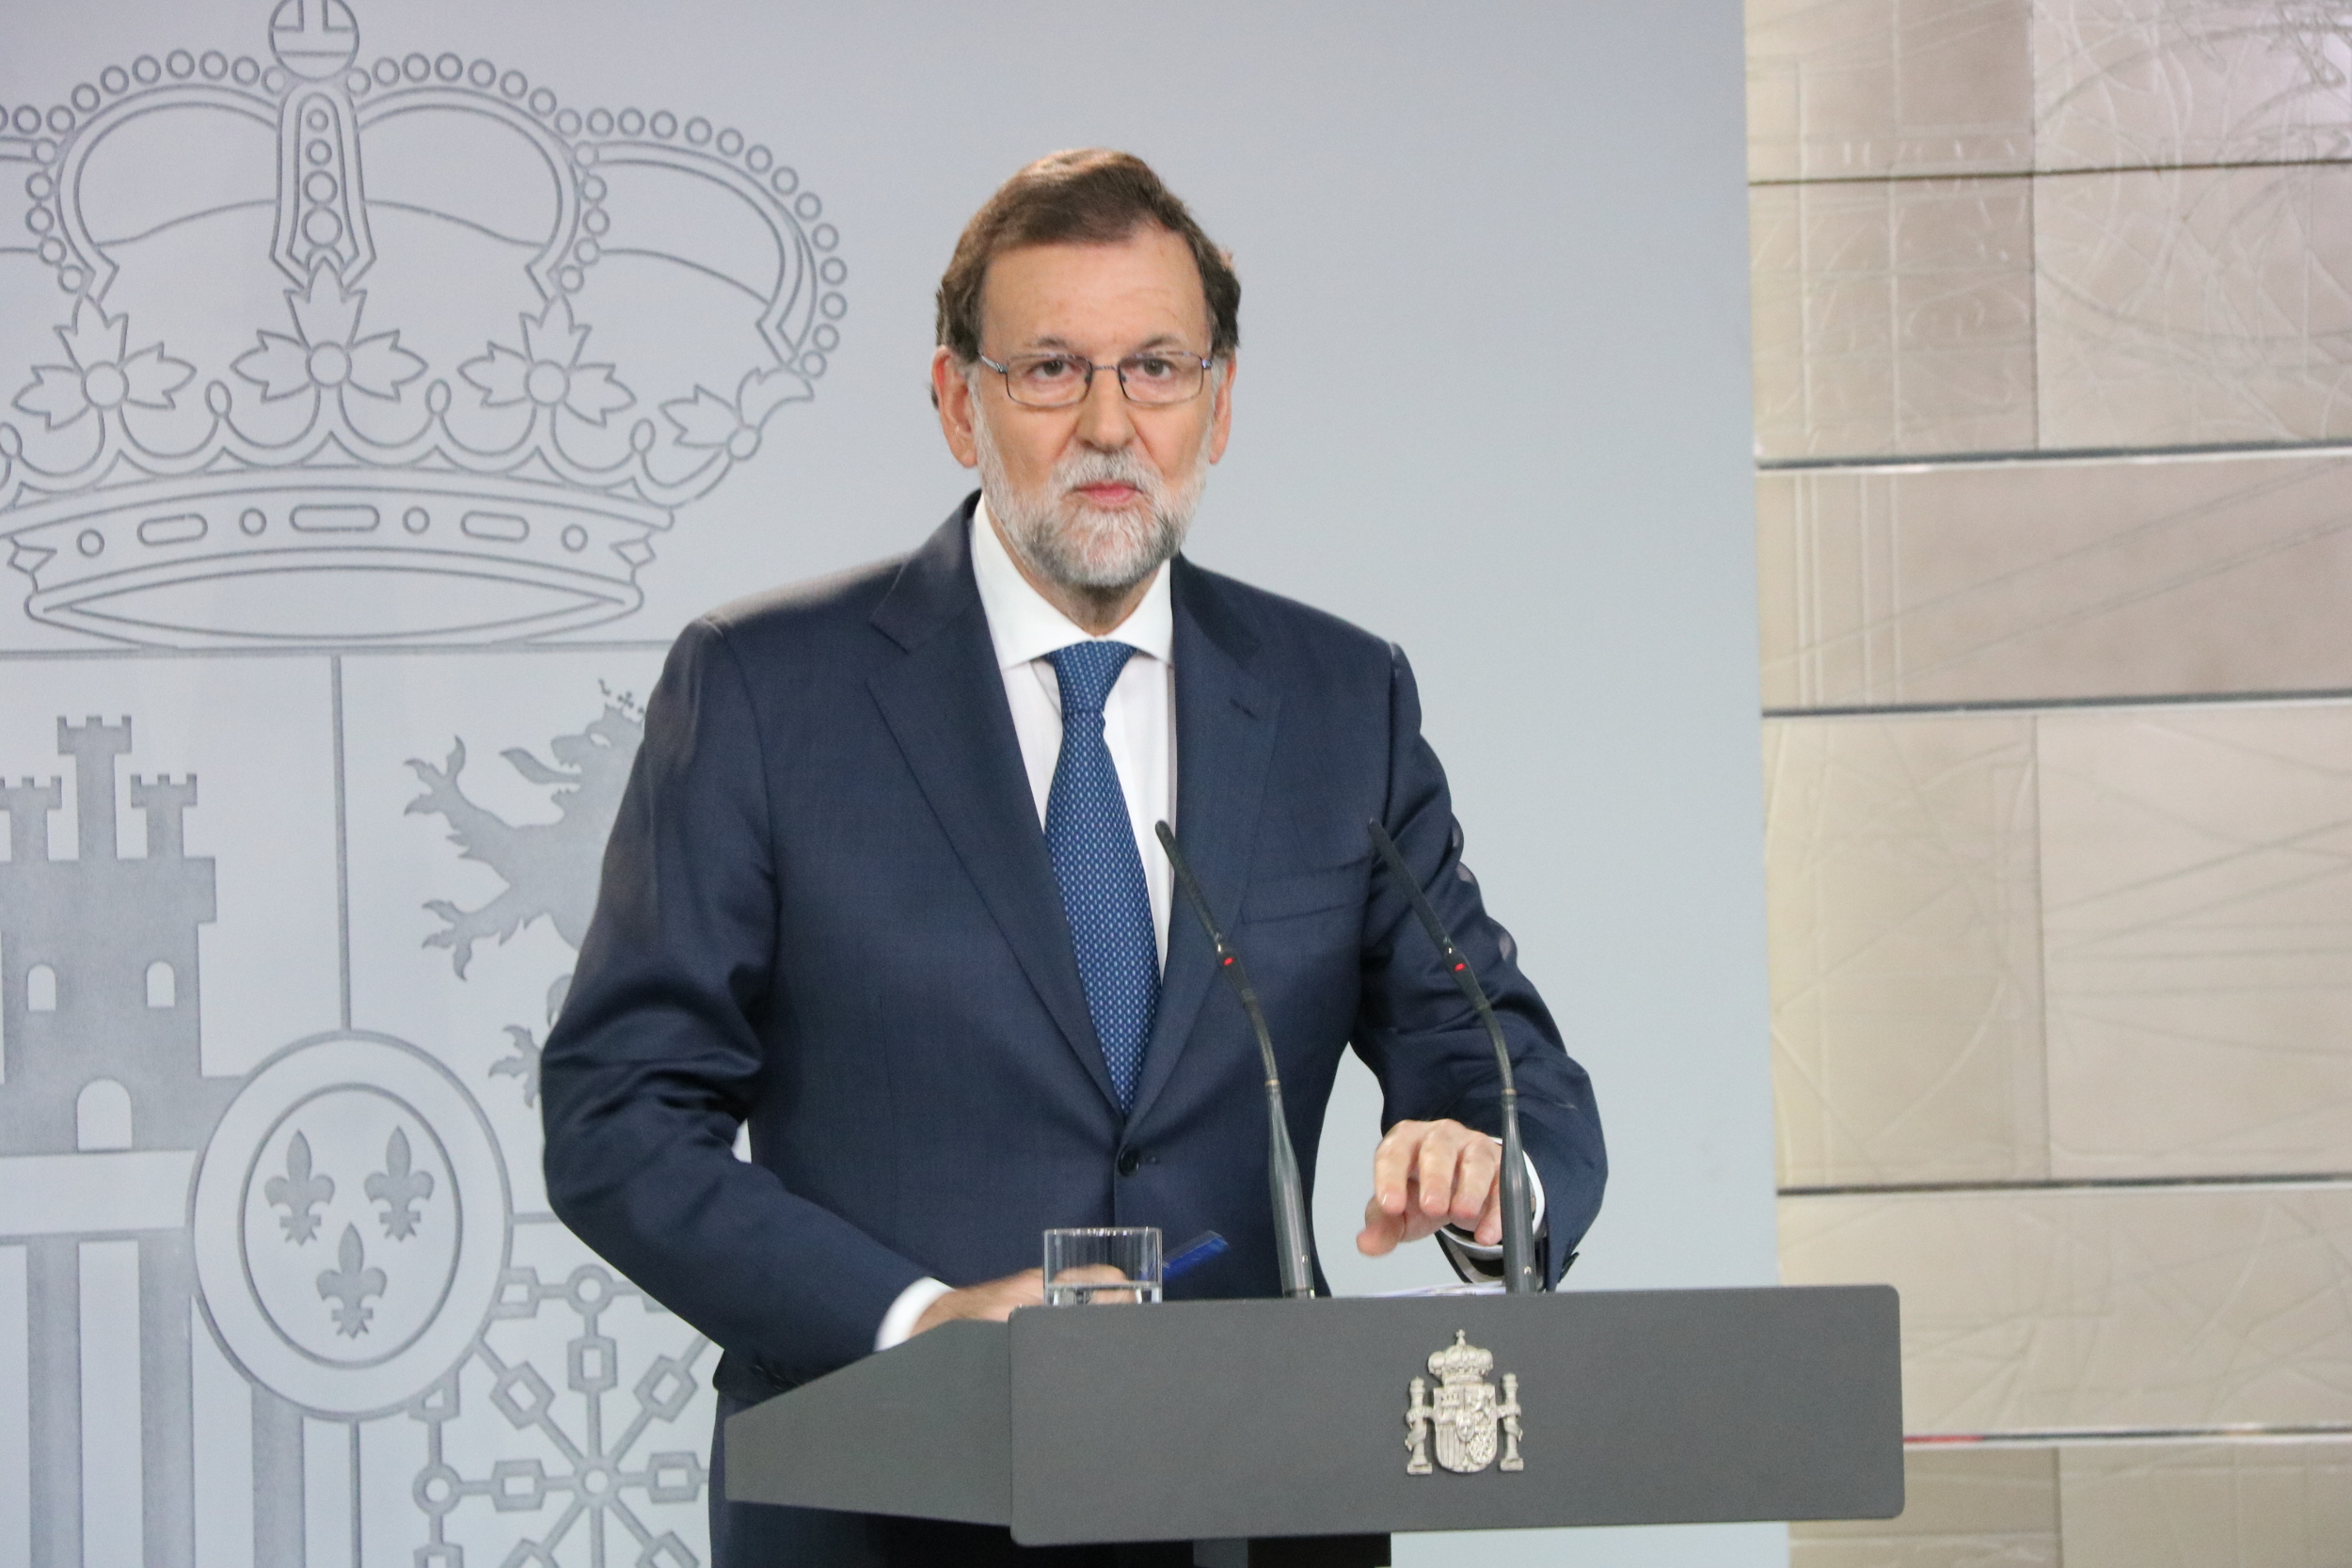 Spanish president Mariano Rajoy at a press conference on Thursday (by ACN)